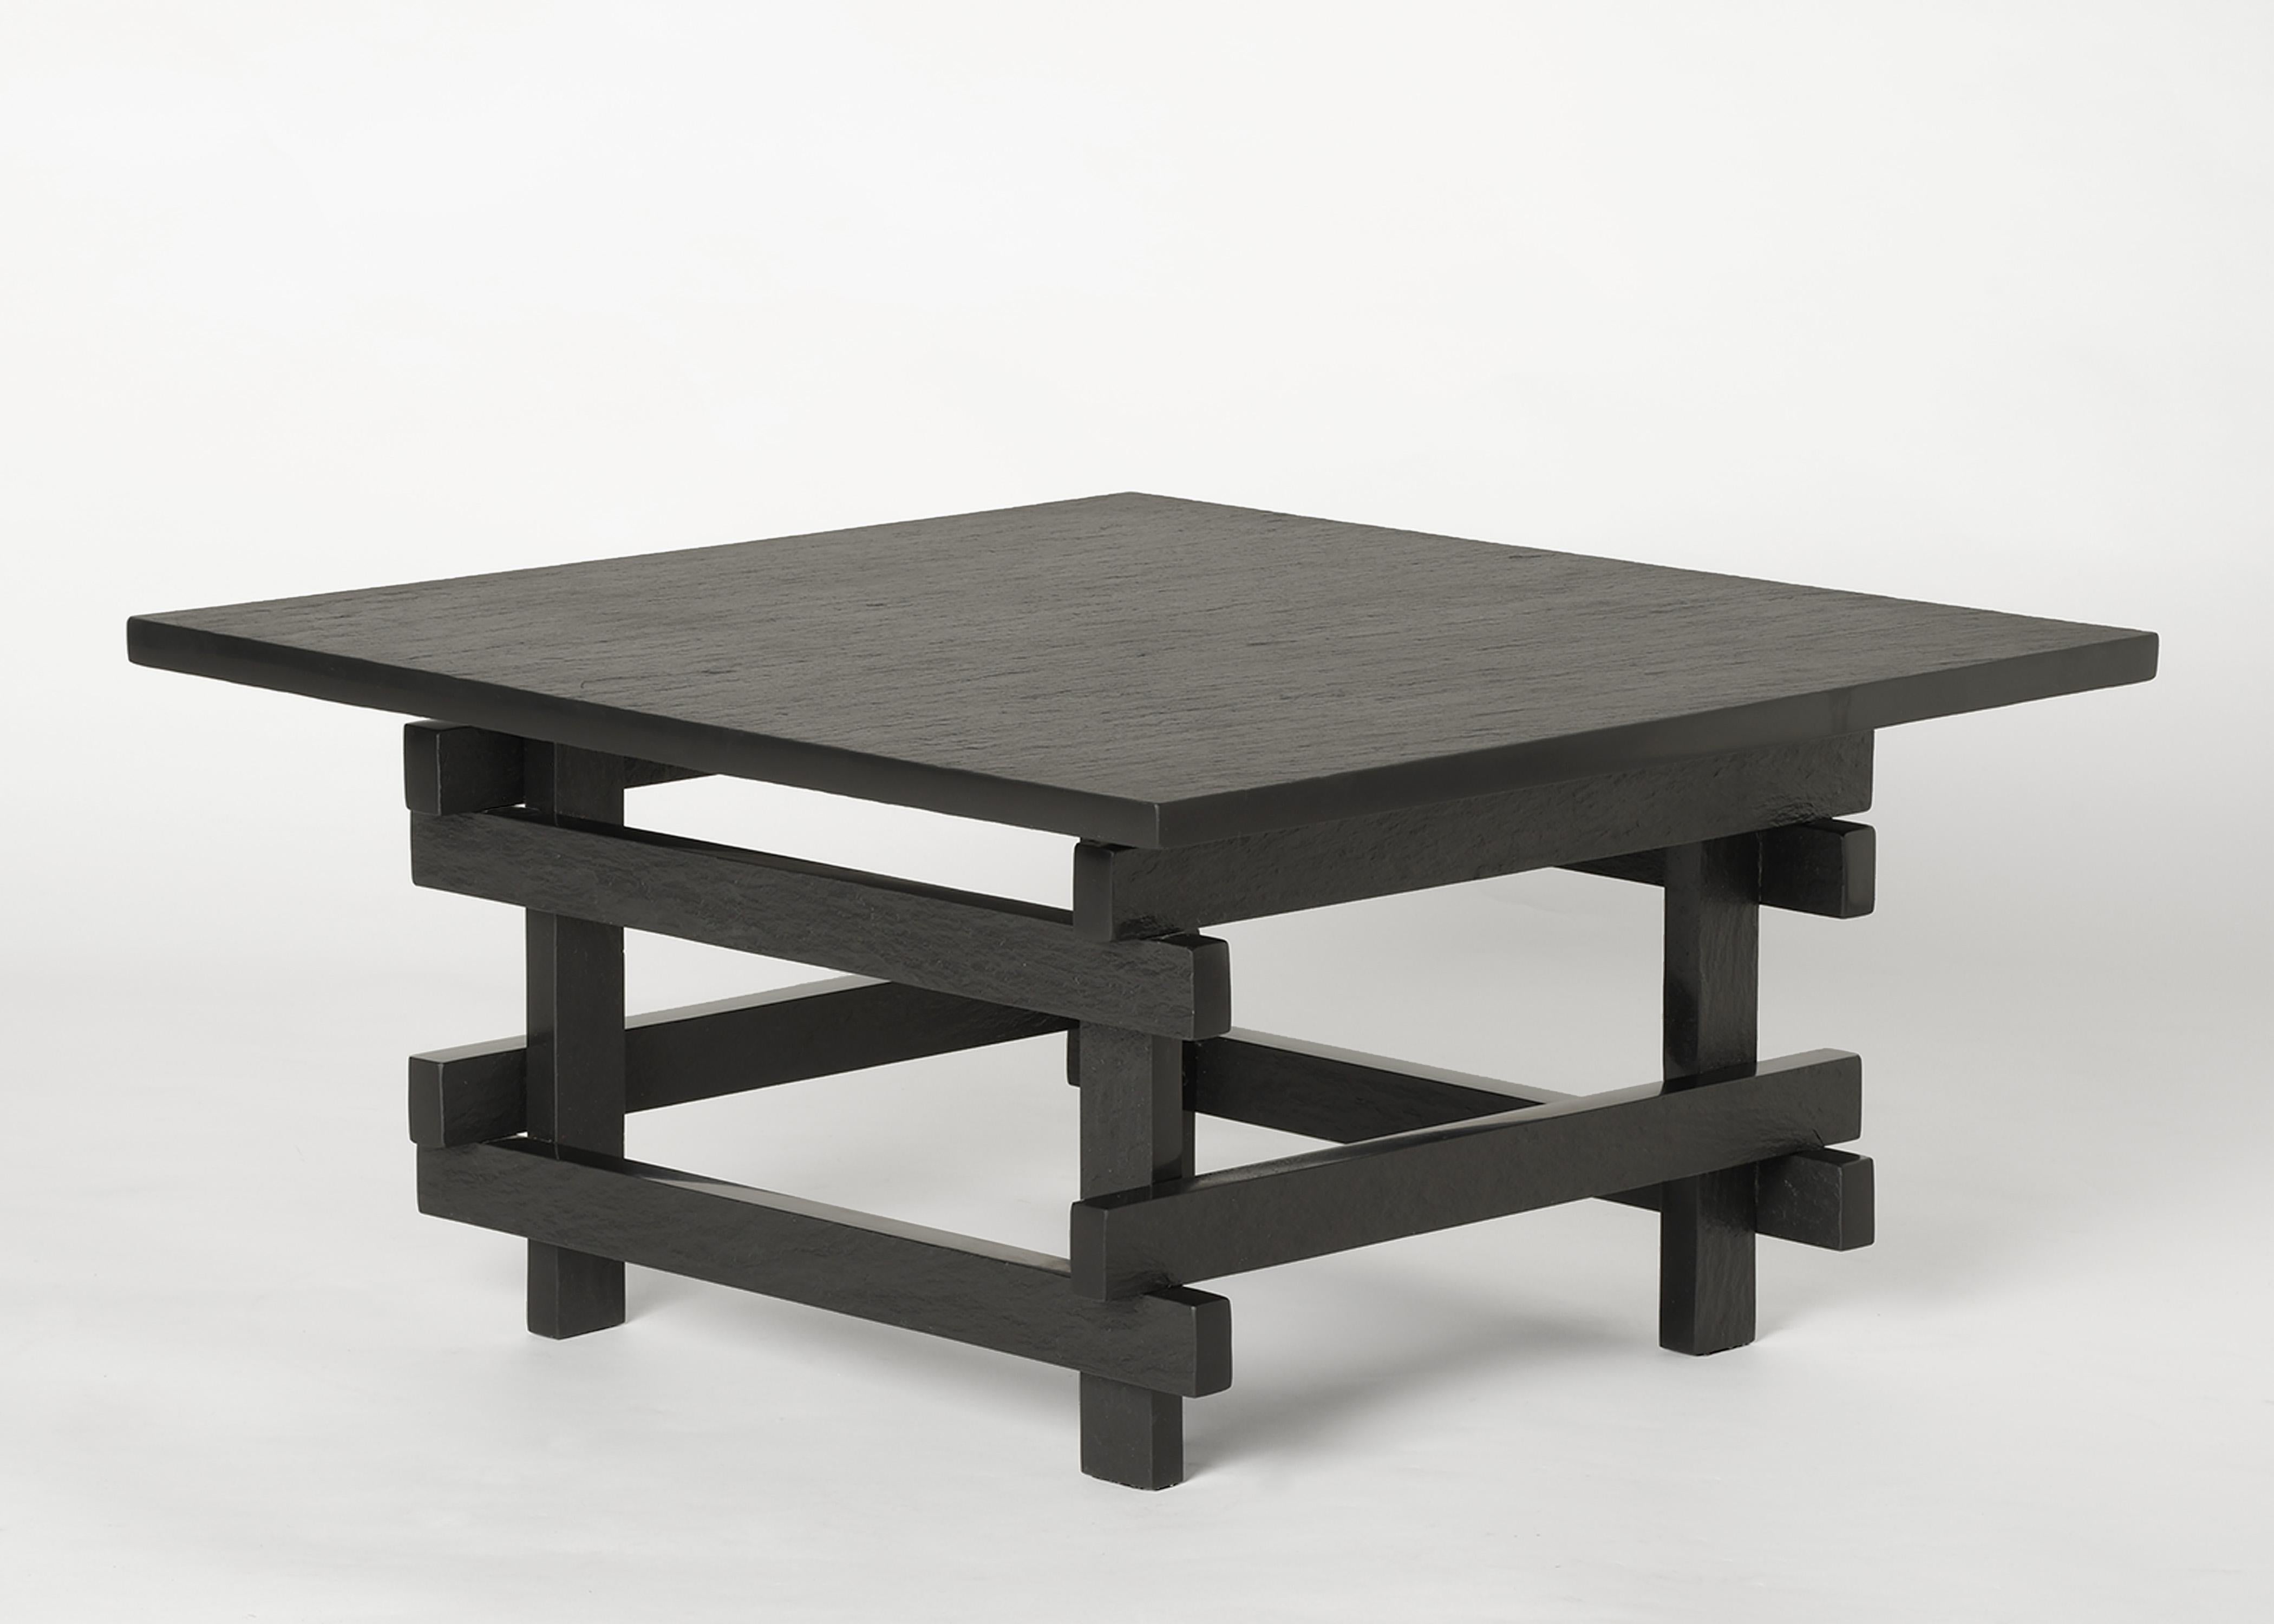 Paranoid coffee table by Edizione Limitata
Limited Edition of 150 pieces. Signed and numbered.
Designers: Simone Fanciullacci
Dimensions: H 32 × W 60 × L 60 cm 
Materials: Handcut slate

Edizione Limitata, that is to say “Limited Edition”, is